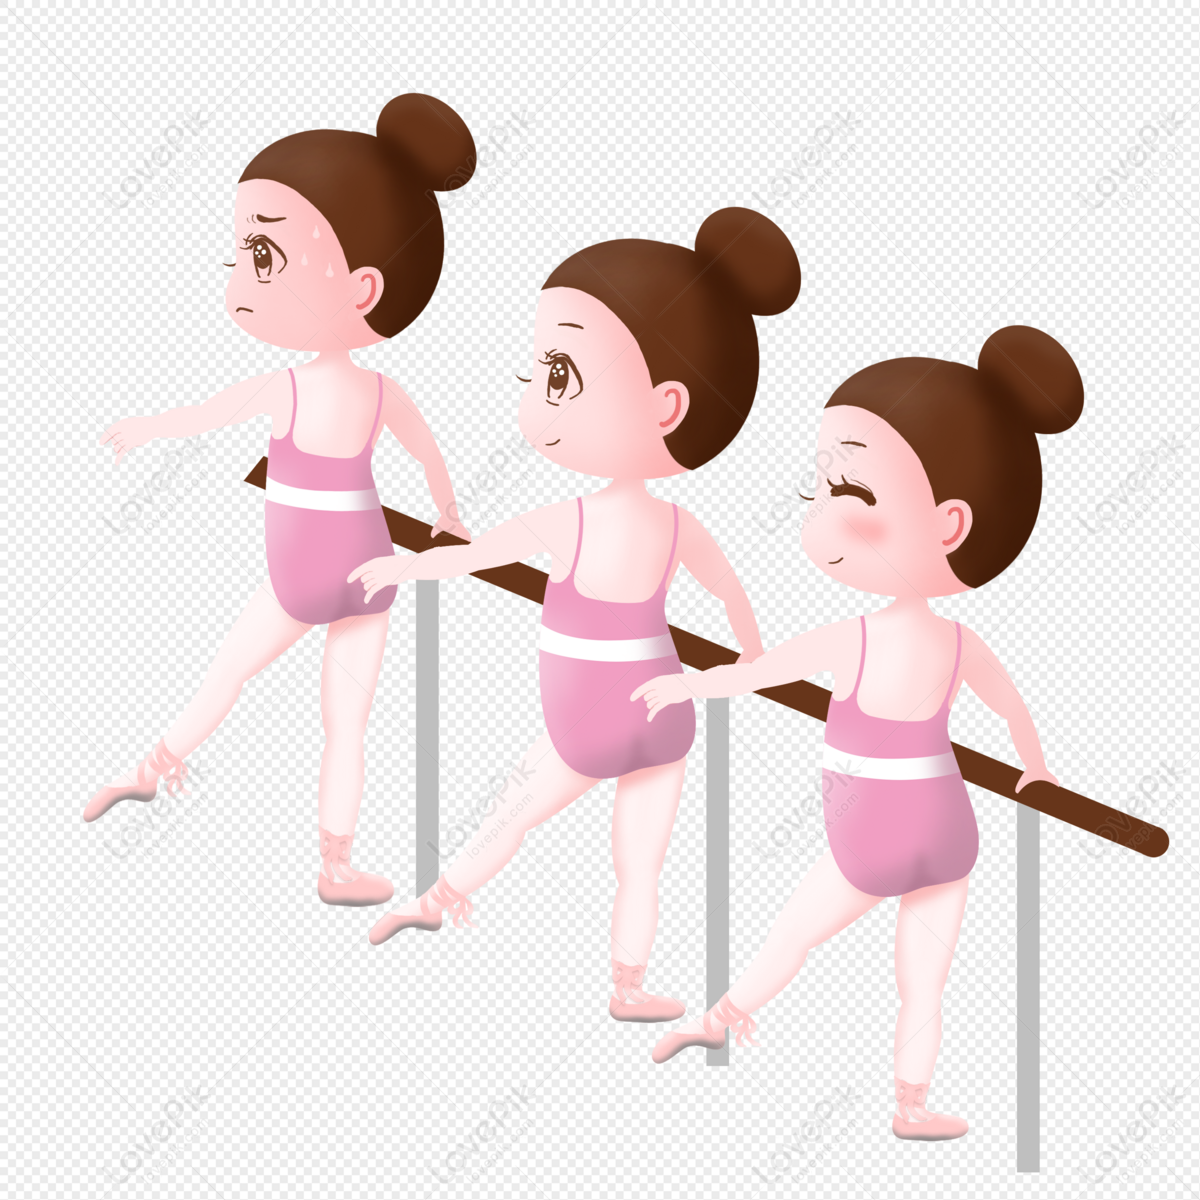 Dancing Children PNG Picture And Clipart Image For Free Download - Lovepik  | 401440825